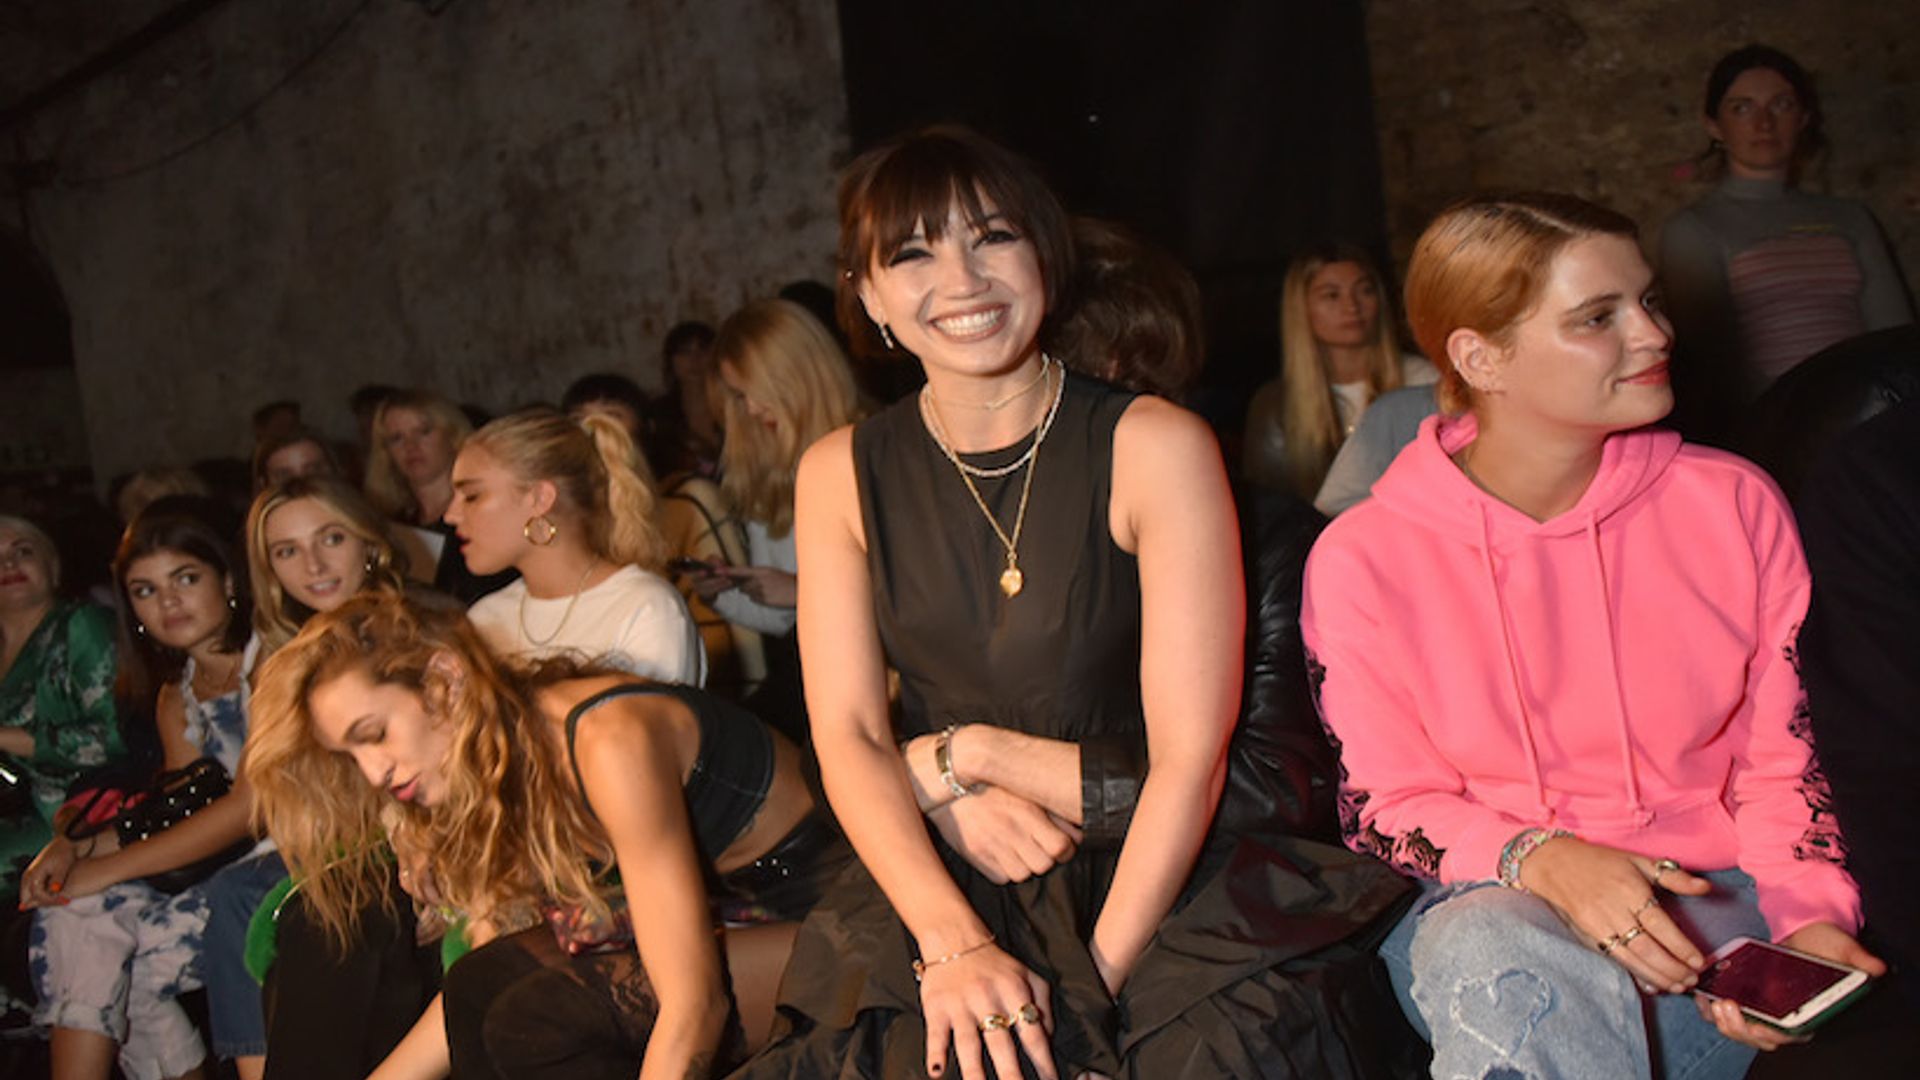 Daisy Lowe unveils radical new hairstyle at London Fashion Week